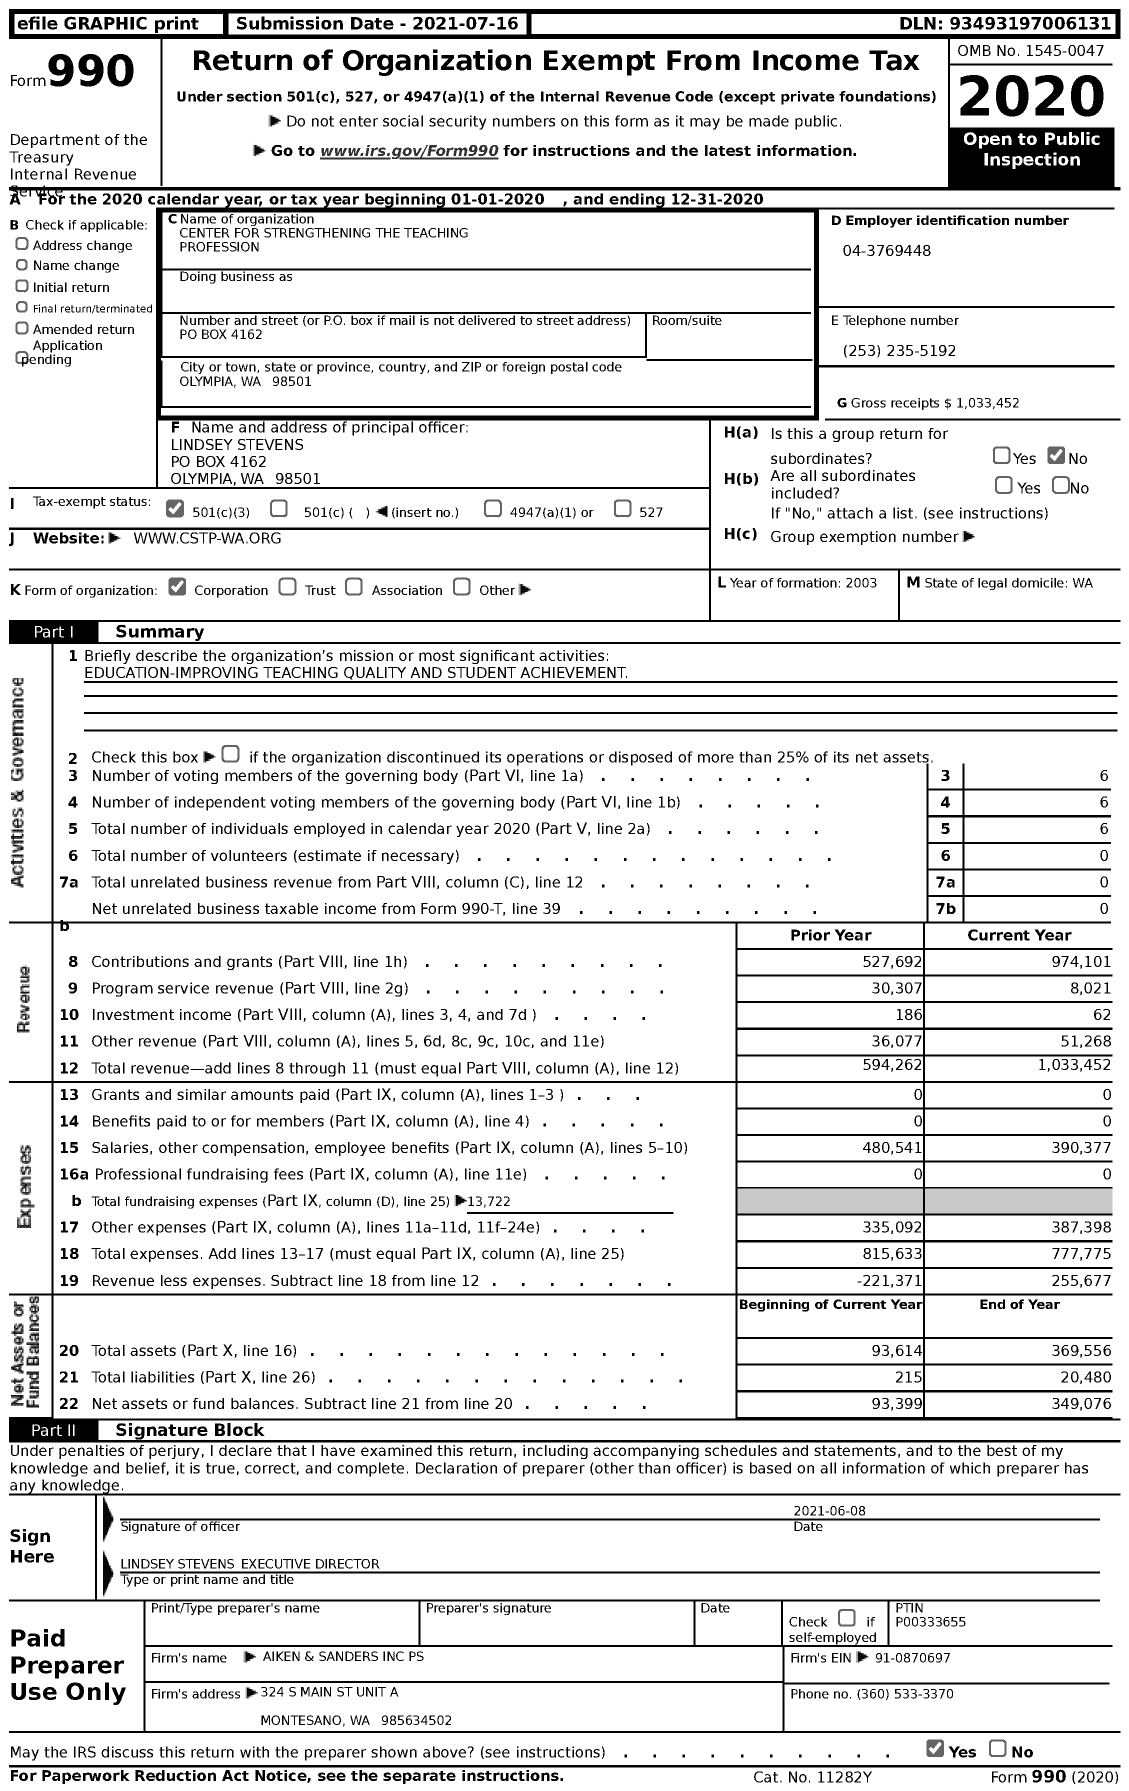 Image of first page of 2020 Form 990 for Center for Strengthening The Teaching Profession